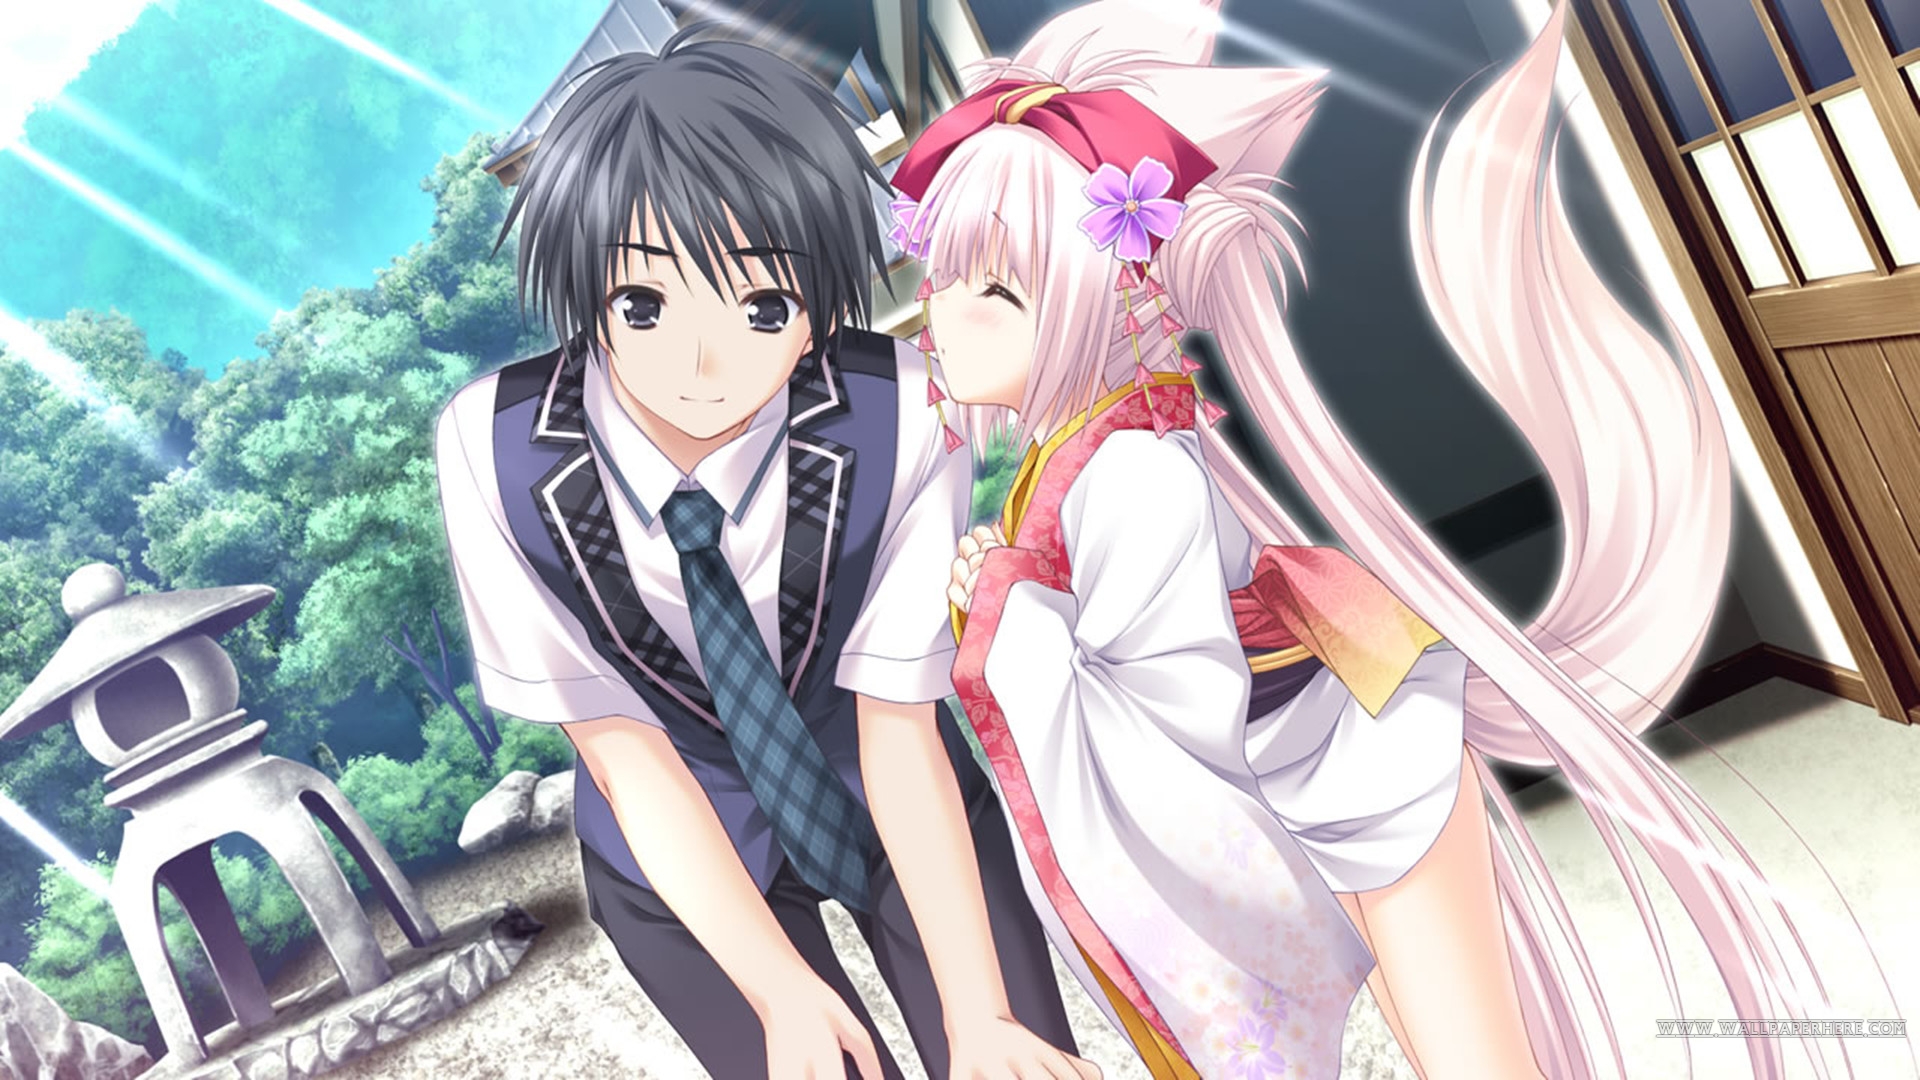 Free Download Cute Anime Couple Wallpaper 1260092 1920x1080 For